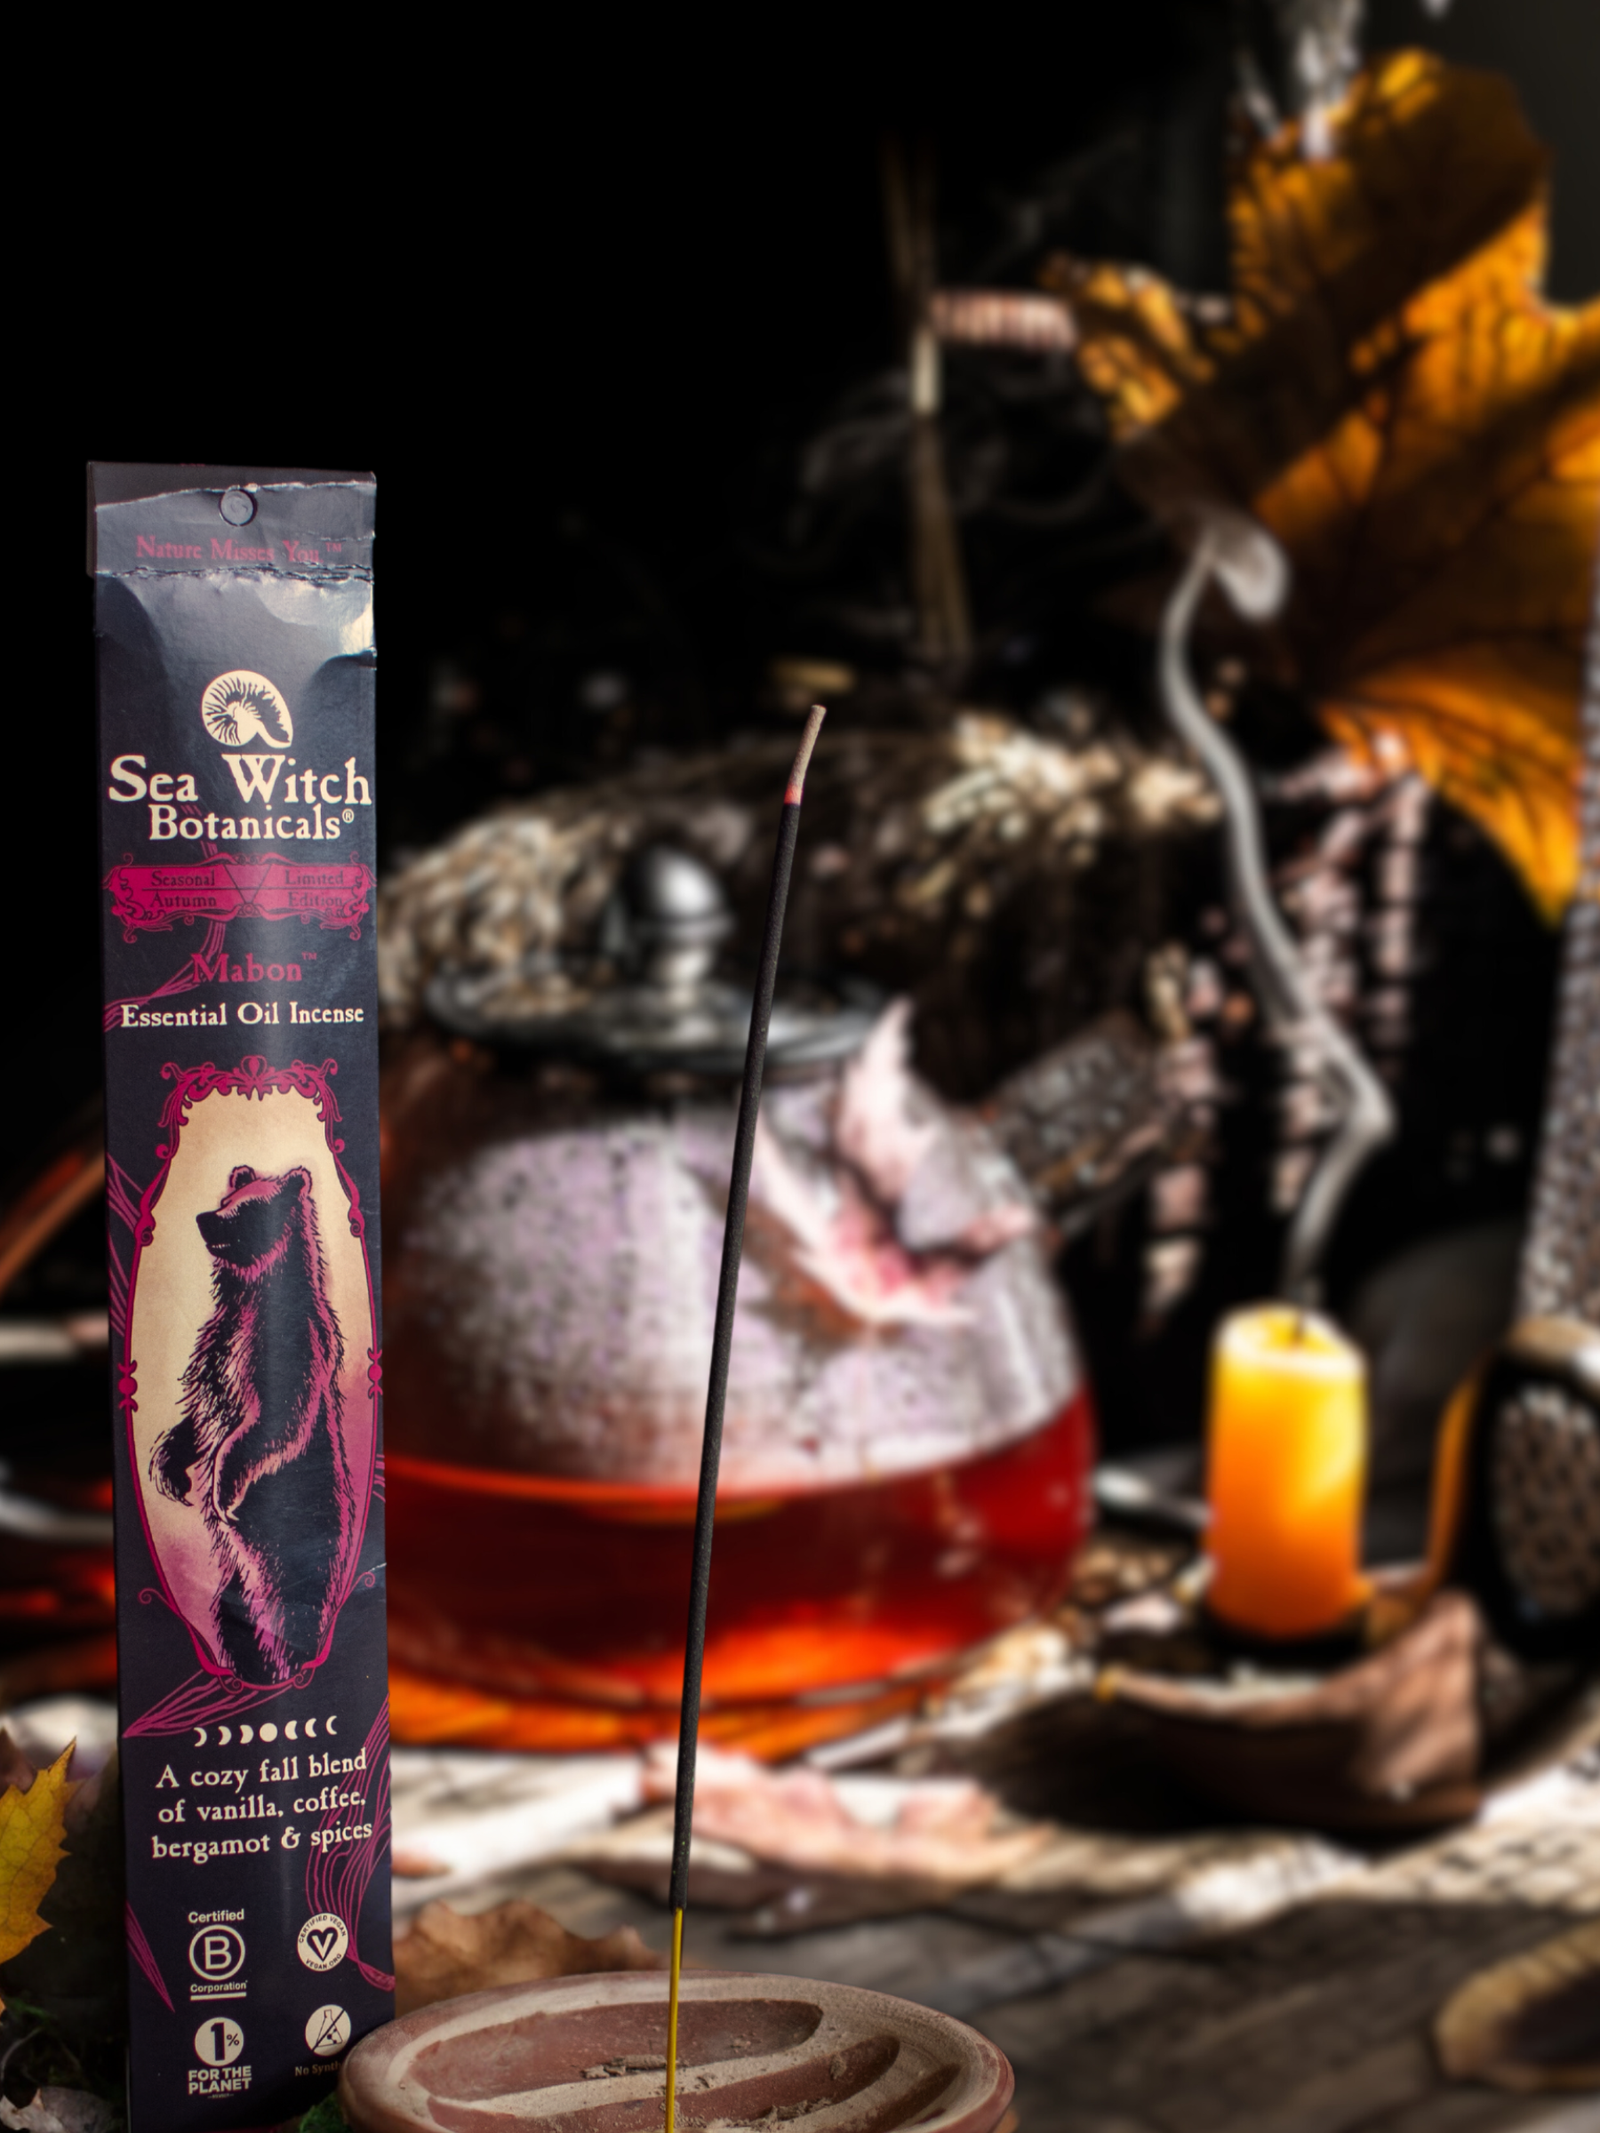 Mabon™ Incense: with All-Natural Coffee, Vanilla, Bergamot, & Spices